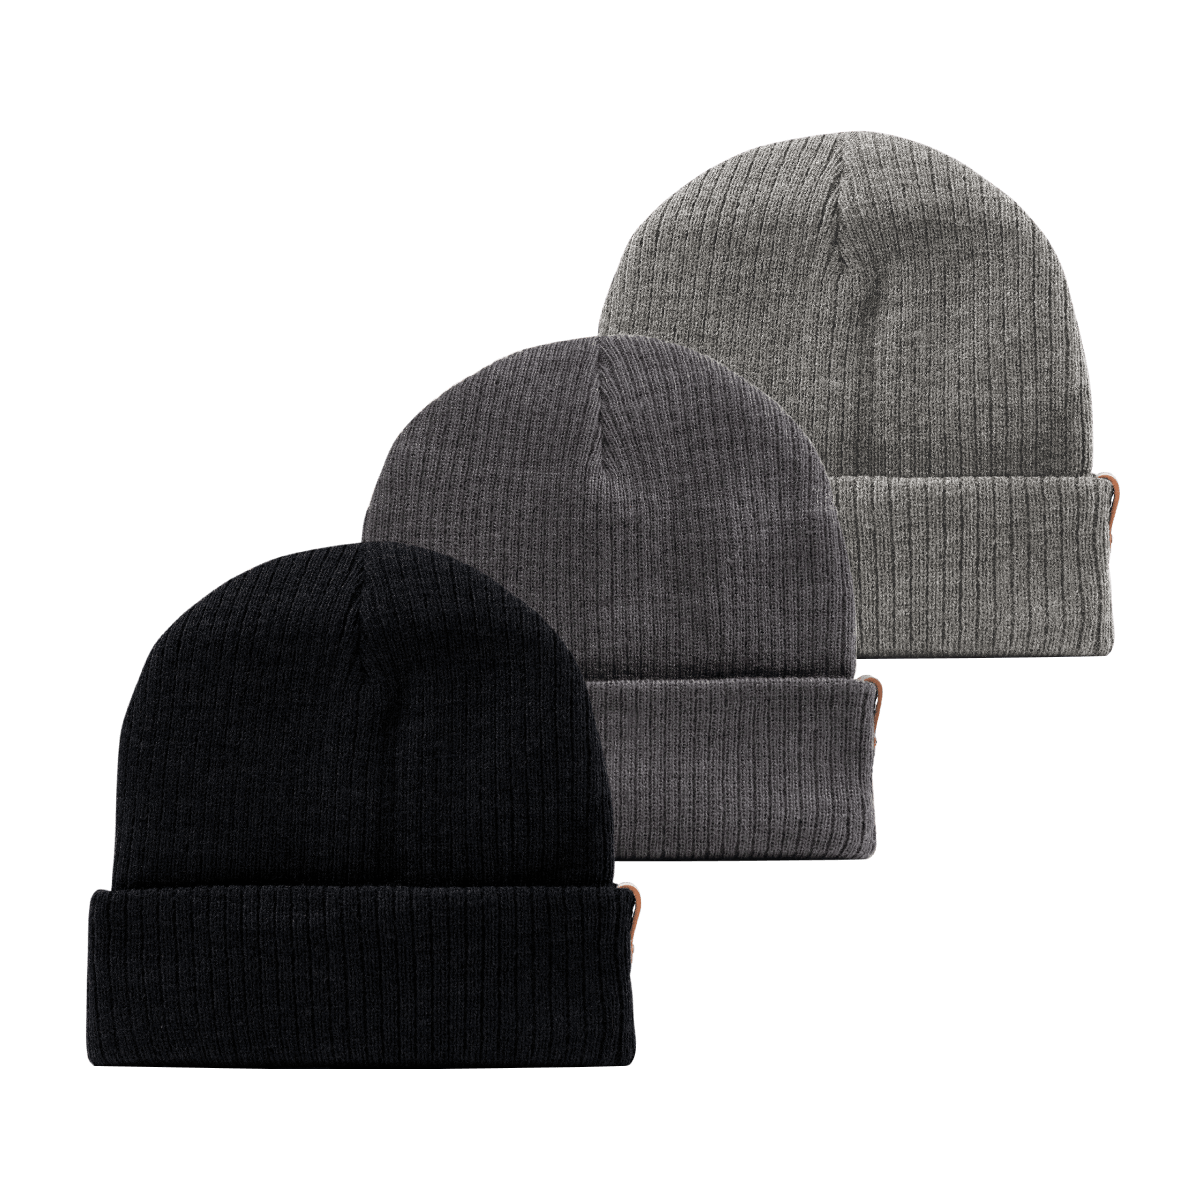 Bare Essential Beanie 3-Pack Black + Charcoal + Gray